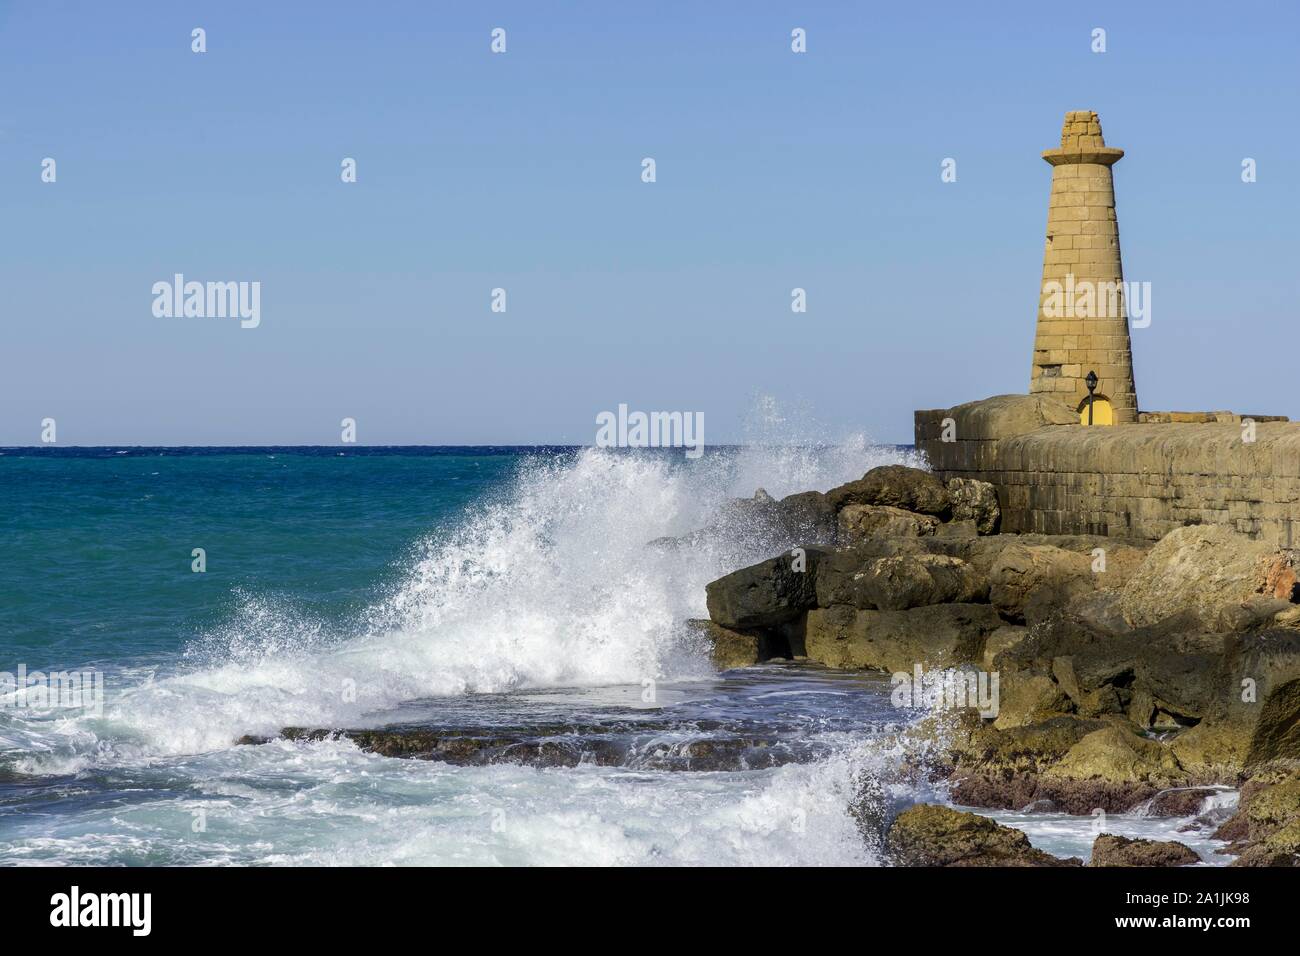 Surf with lighthousehouse, Port of Girne, District of Kyrenia, Turkish Republic of Northern Cyprus, Cyprus Stock Photo